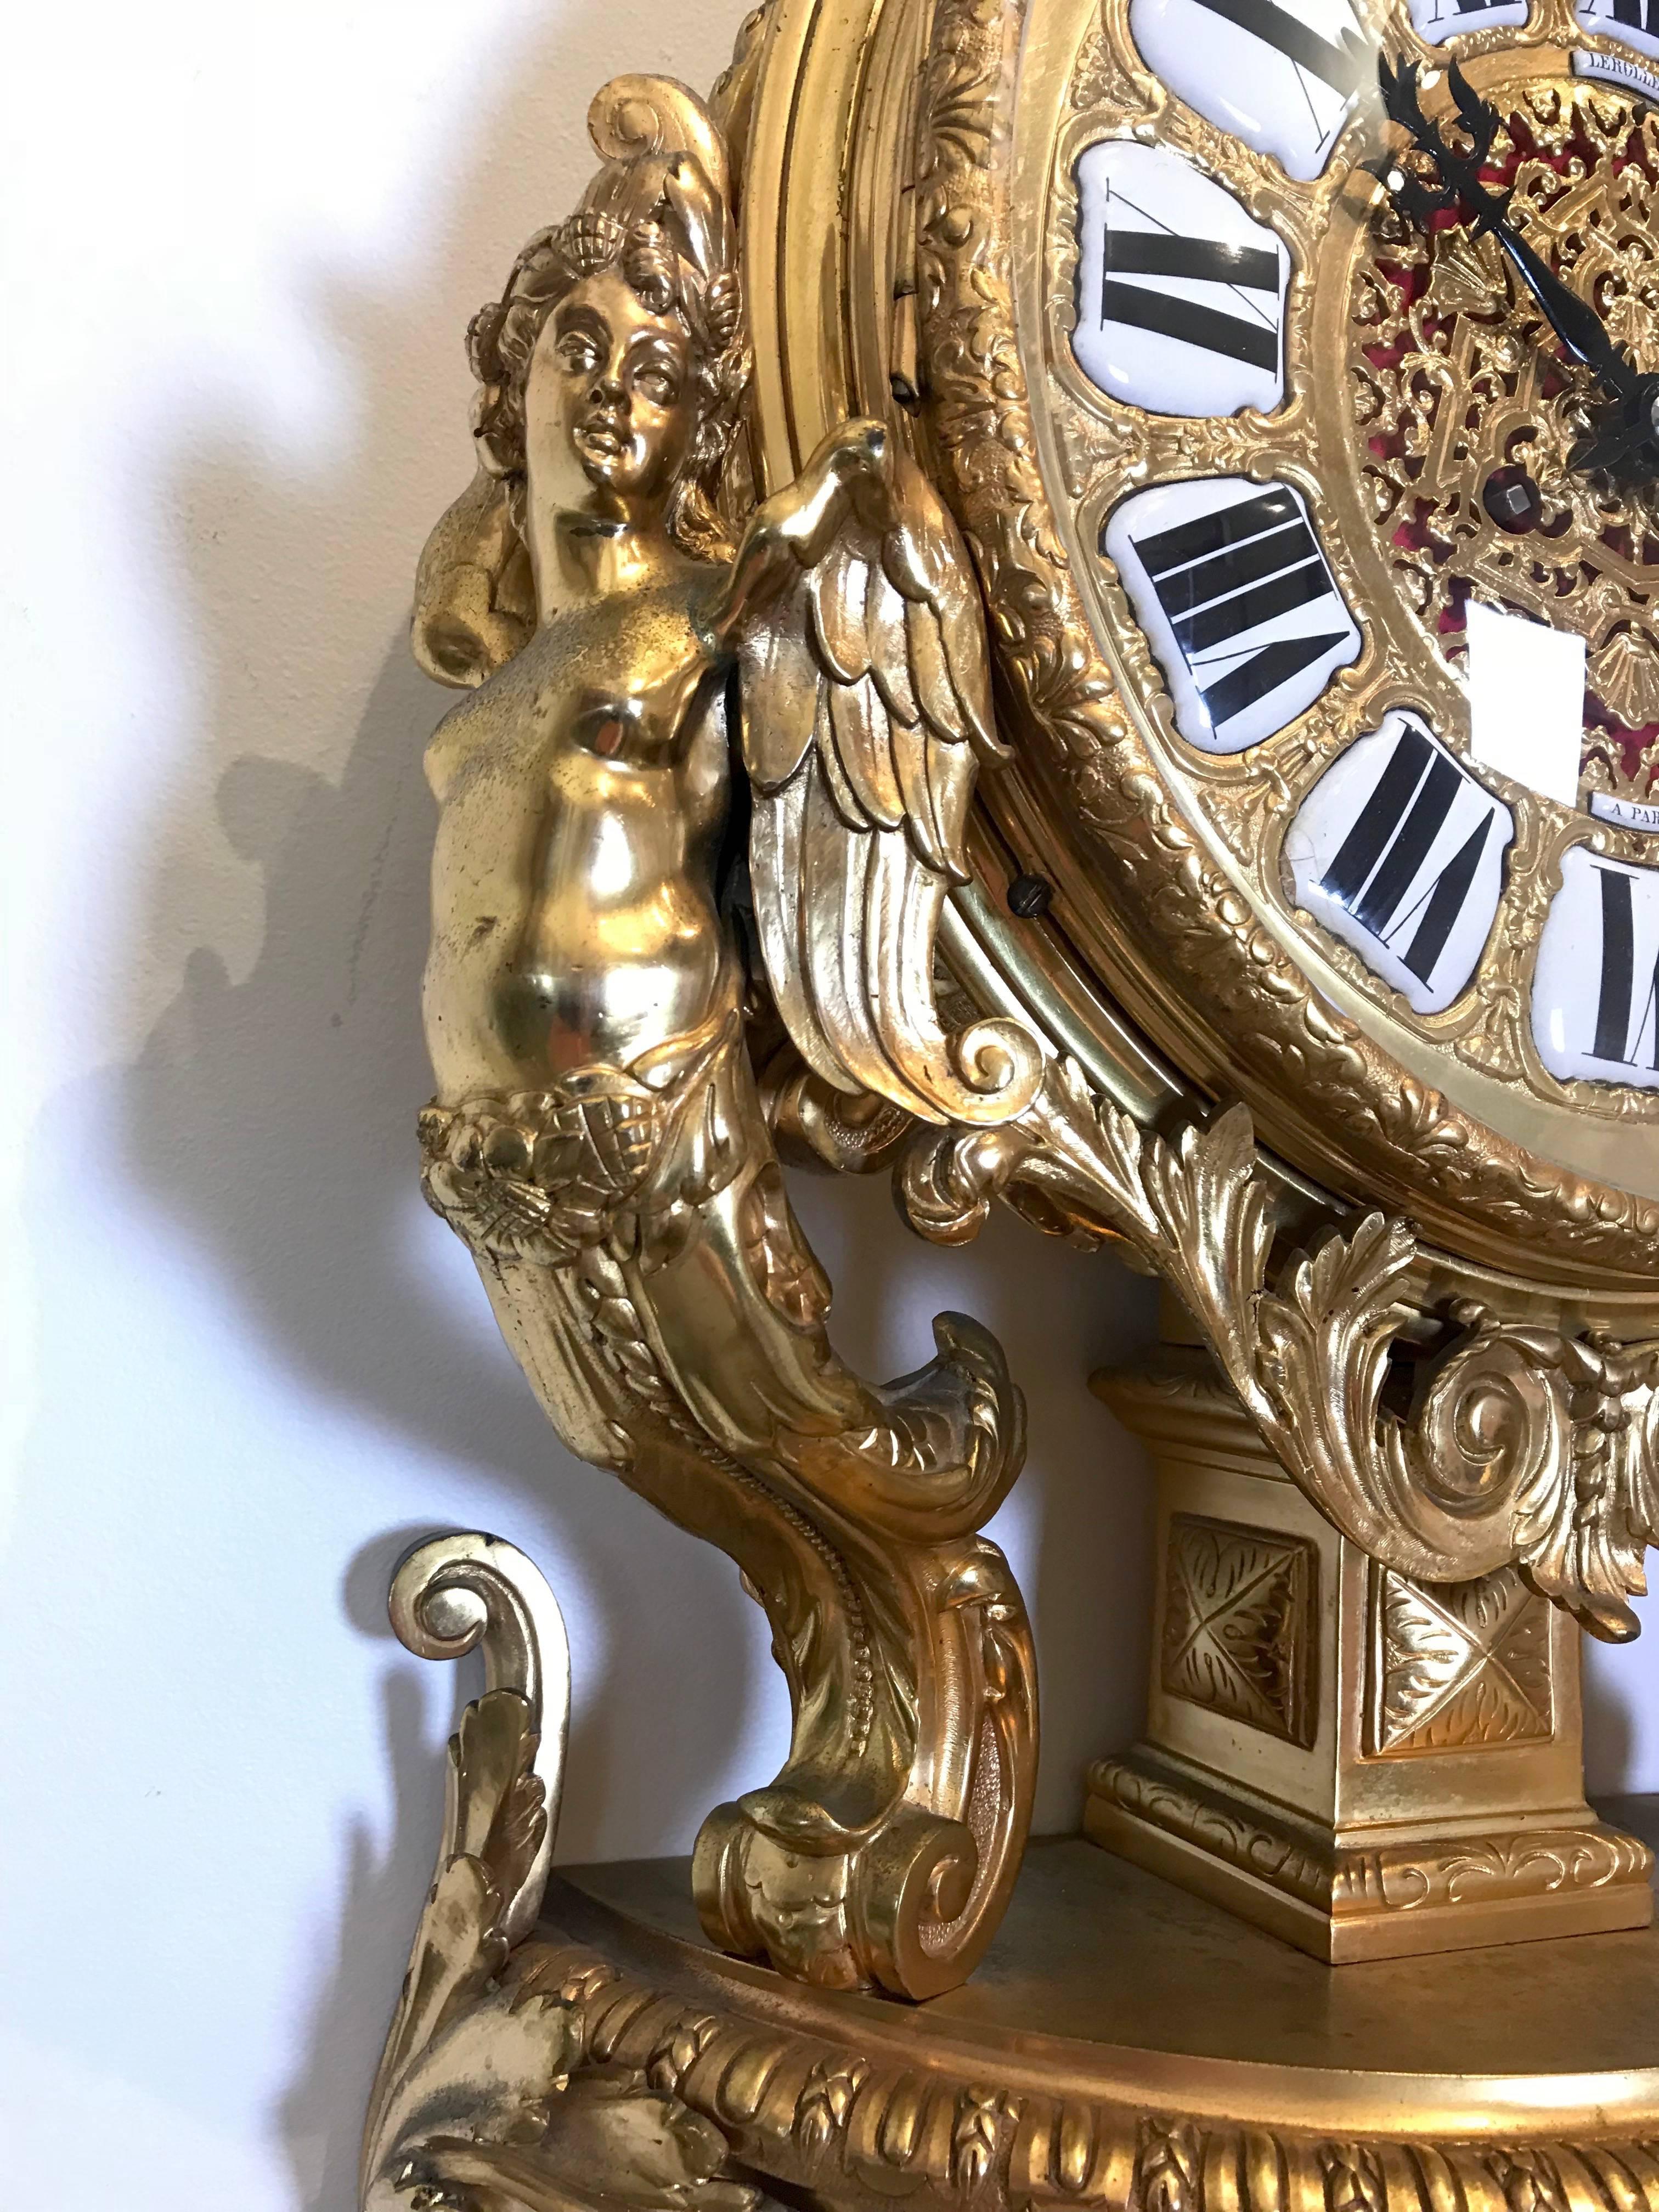 Lerolle Freres Gilt Bronze Louis XVI Style Wall Clock, 19th Century For Sale 2